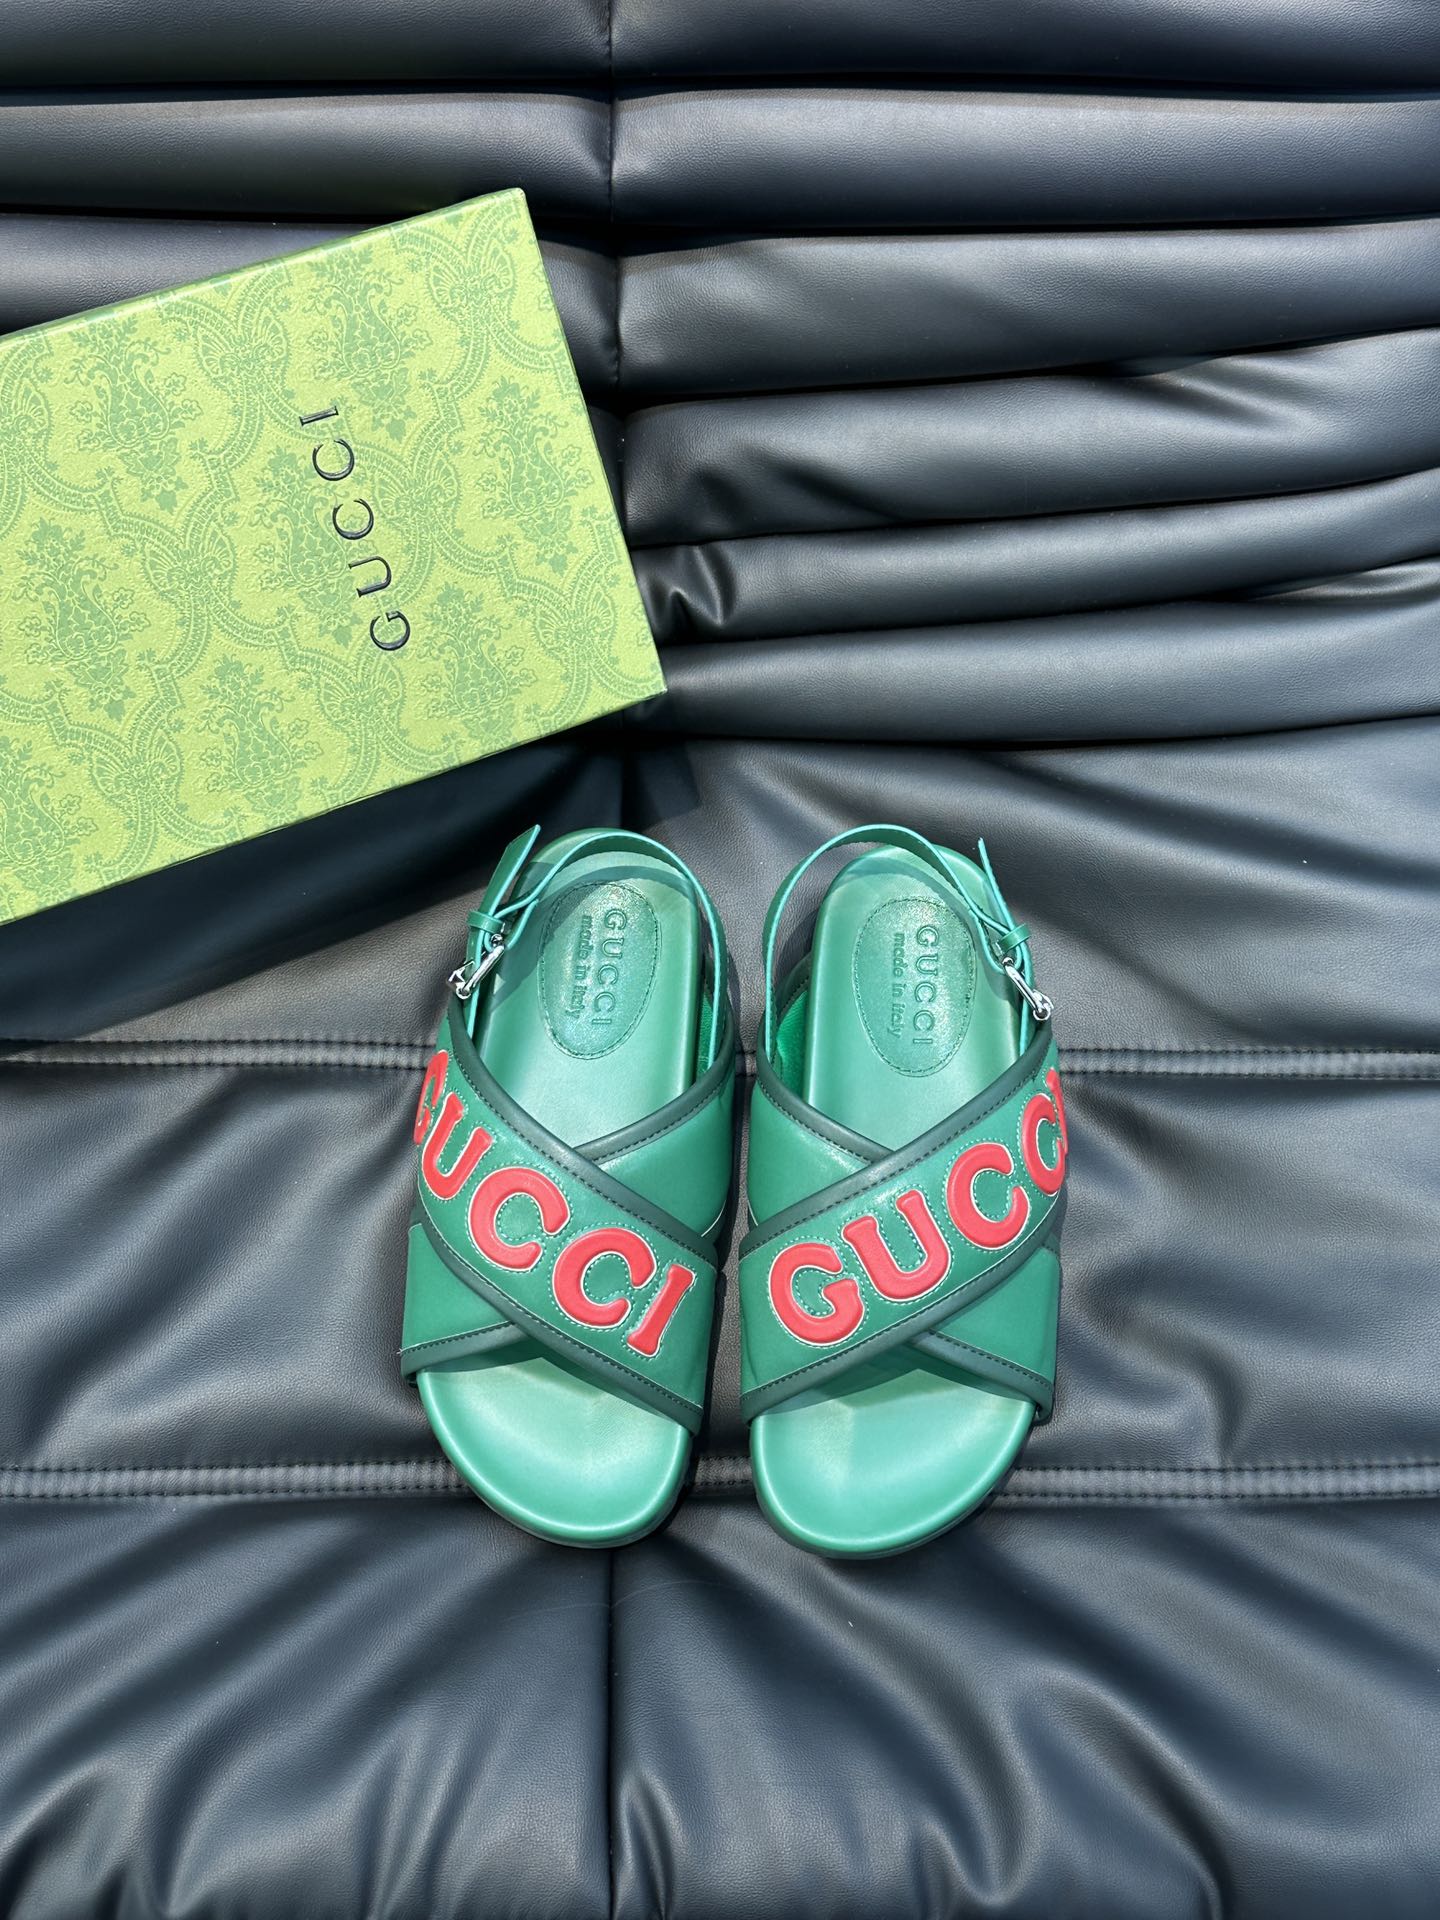 Gucci Shoes Sandals Slippers Sale Outlet Online
 Unisex Cowhide TPU Spring/Summer Collection Fashion